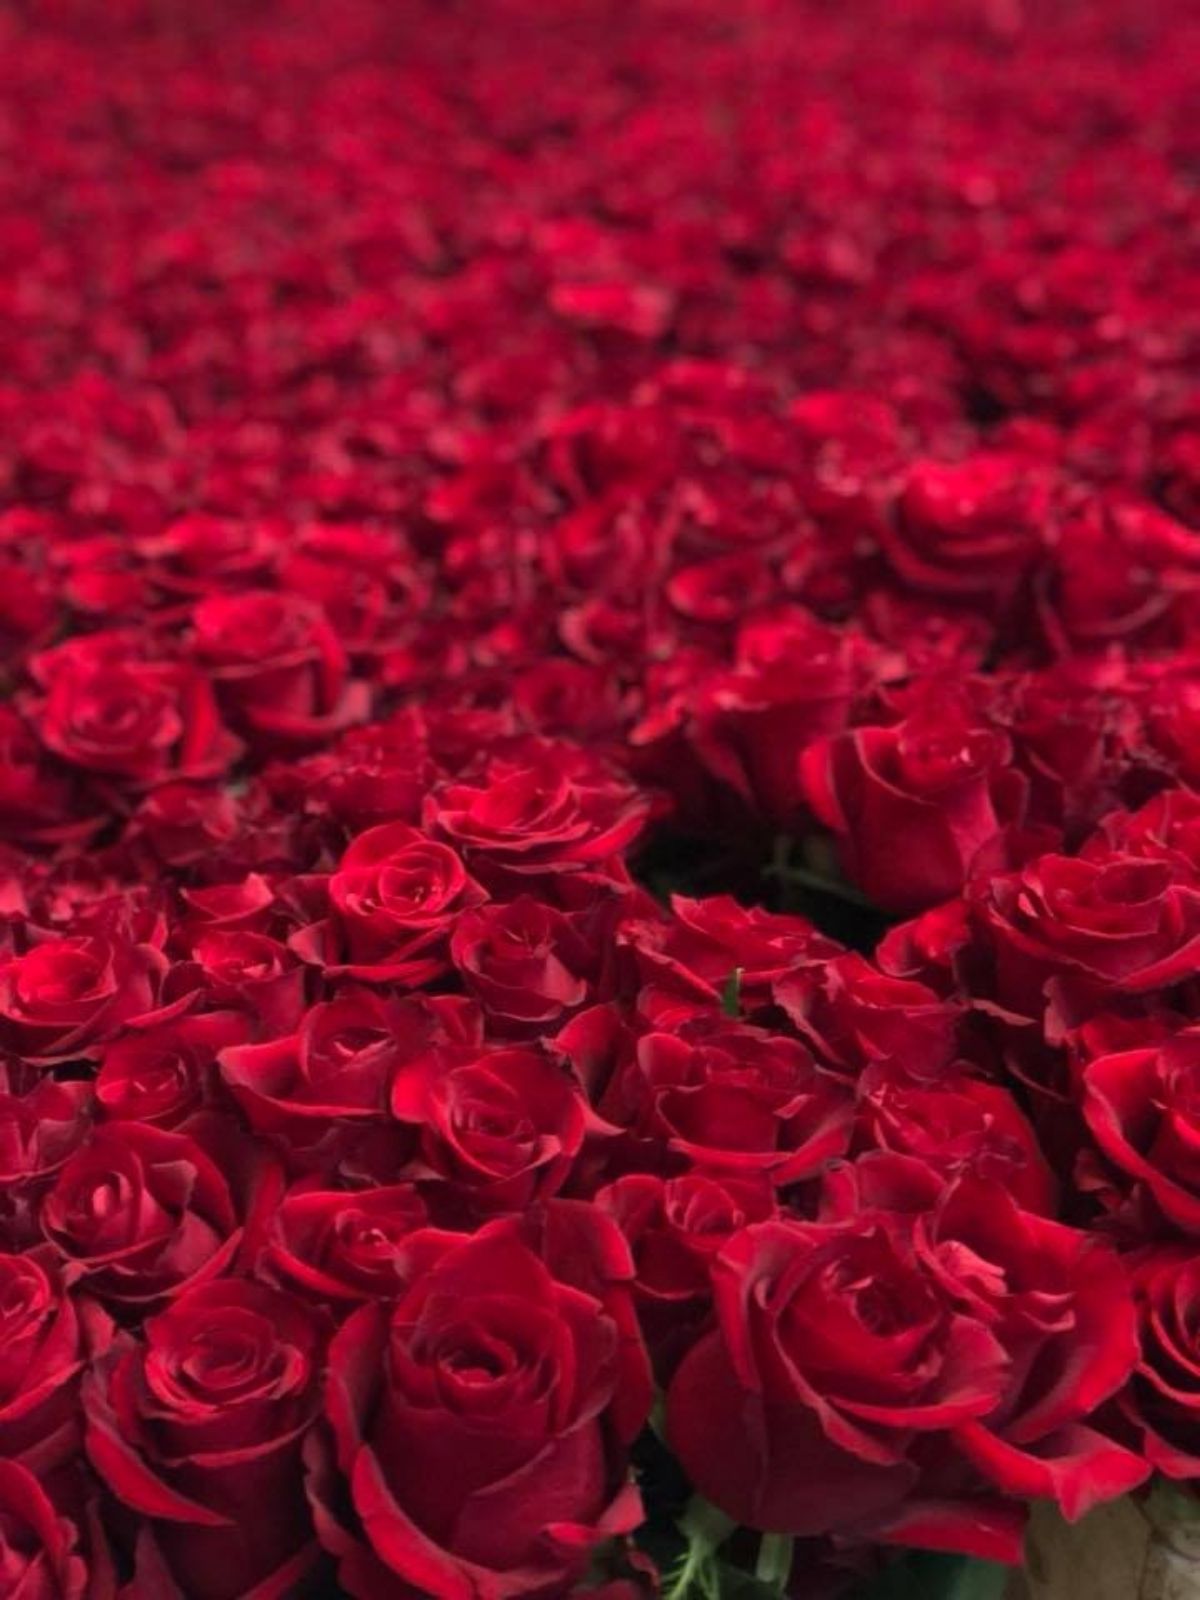 These Are the Best Red Roses to Give on Valentine's Day - valentine's day on thursd - ever red roses by Tom de Houwer of Decofresh roses